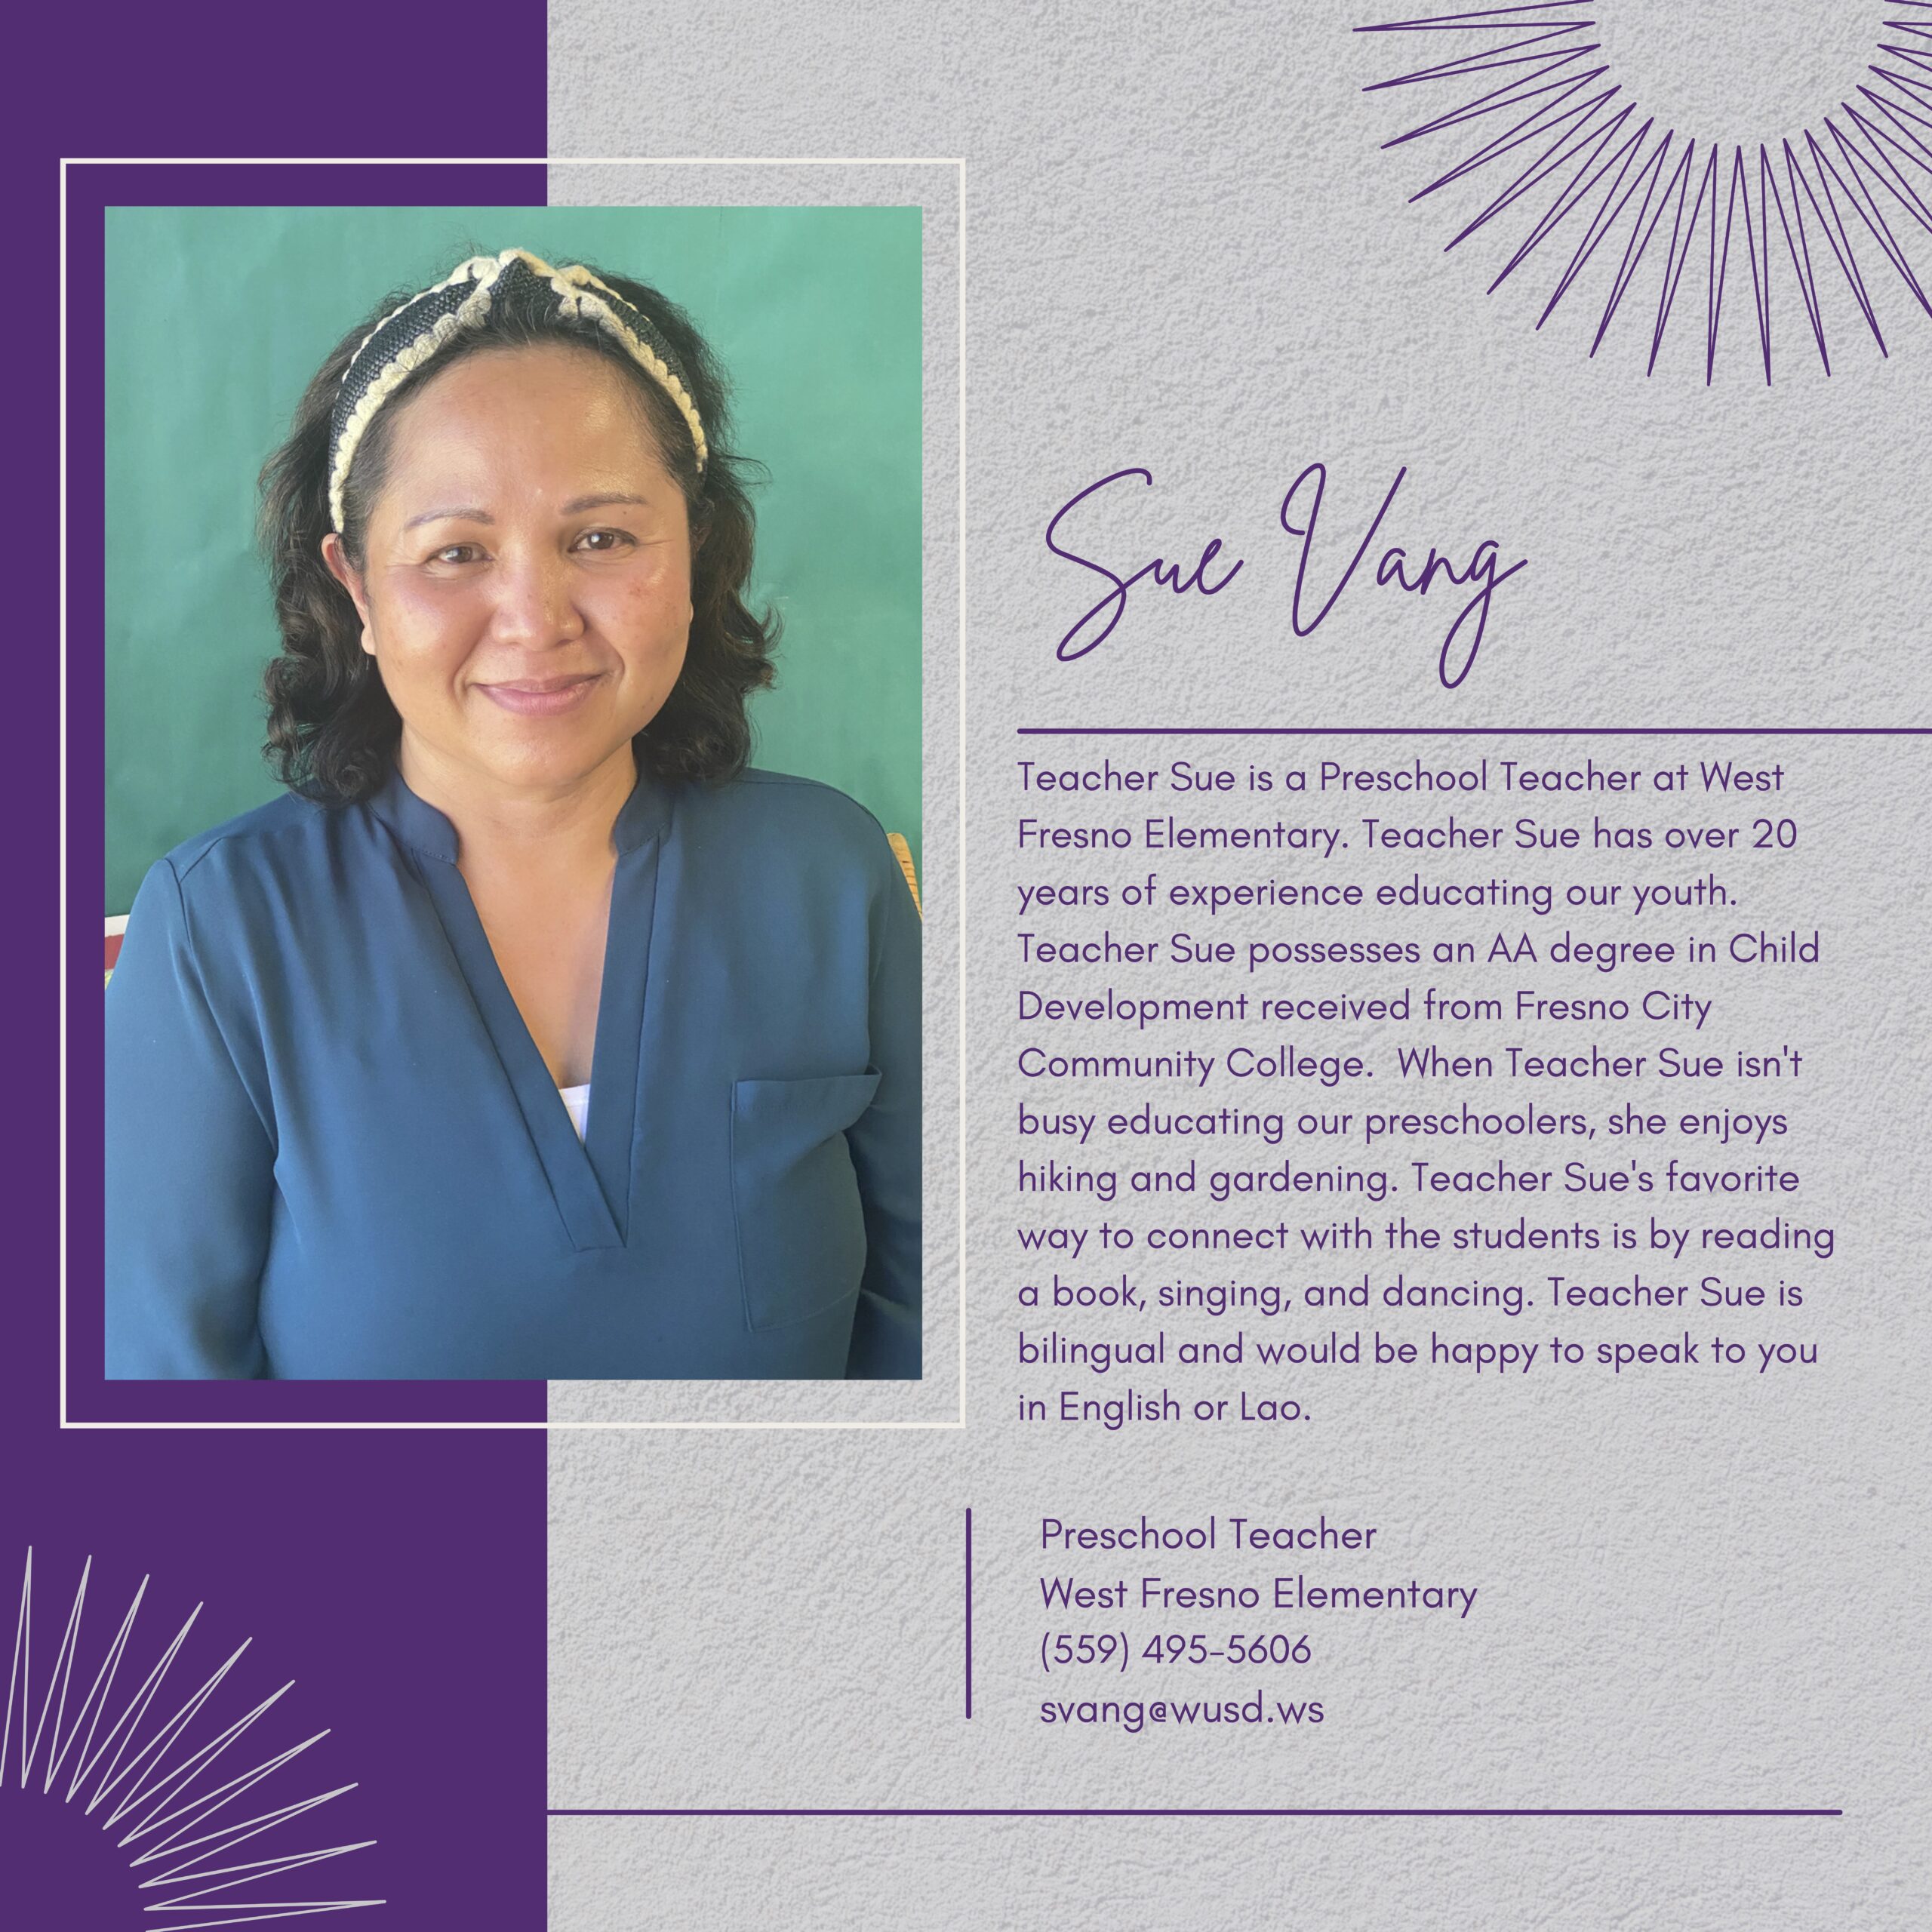 Teacher Sue is a Preschool Teacher at West Fresno Elementary. Teacher Sue has over 20 years of experience educating our youth. Teacher Sue possesses an A degree in Child Development received from Fresno City Community College. When Teacher Sue isn't busy educating our preschoolers, she enjoys hiking and gardening. Teacher Sue's favorite way to connect with the students is by reading a book, singing, and dancing. Teacher Sue is bilingual and would be happy to speak to you in English or Lao. Preschool Teacher West Fresno Elementary (559) 495-5606